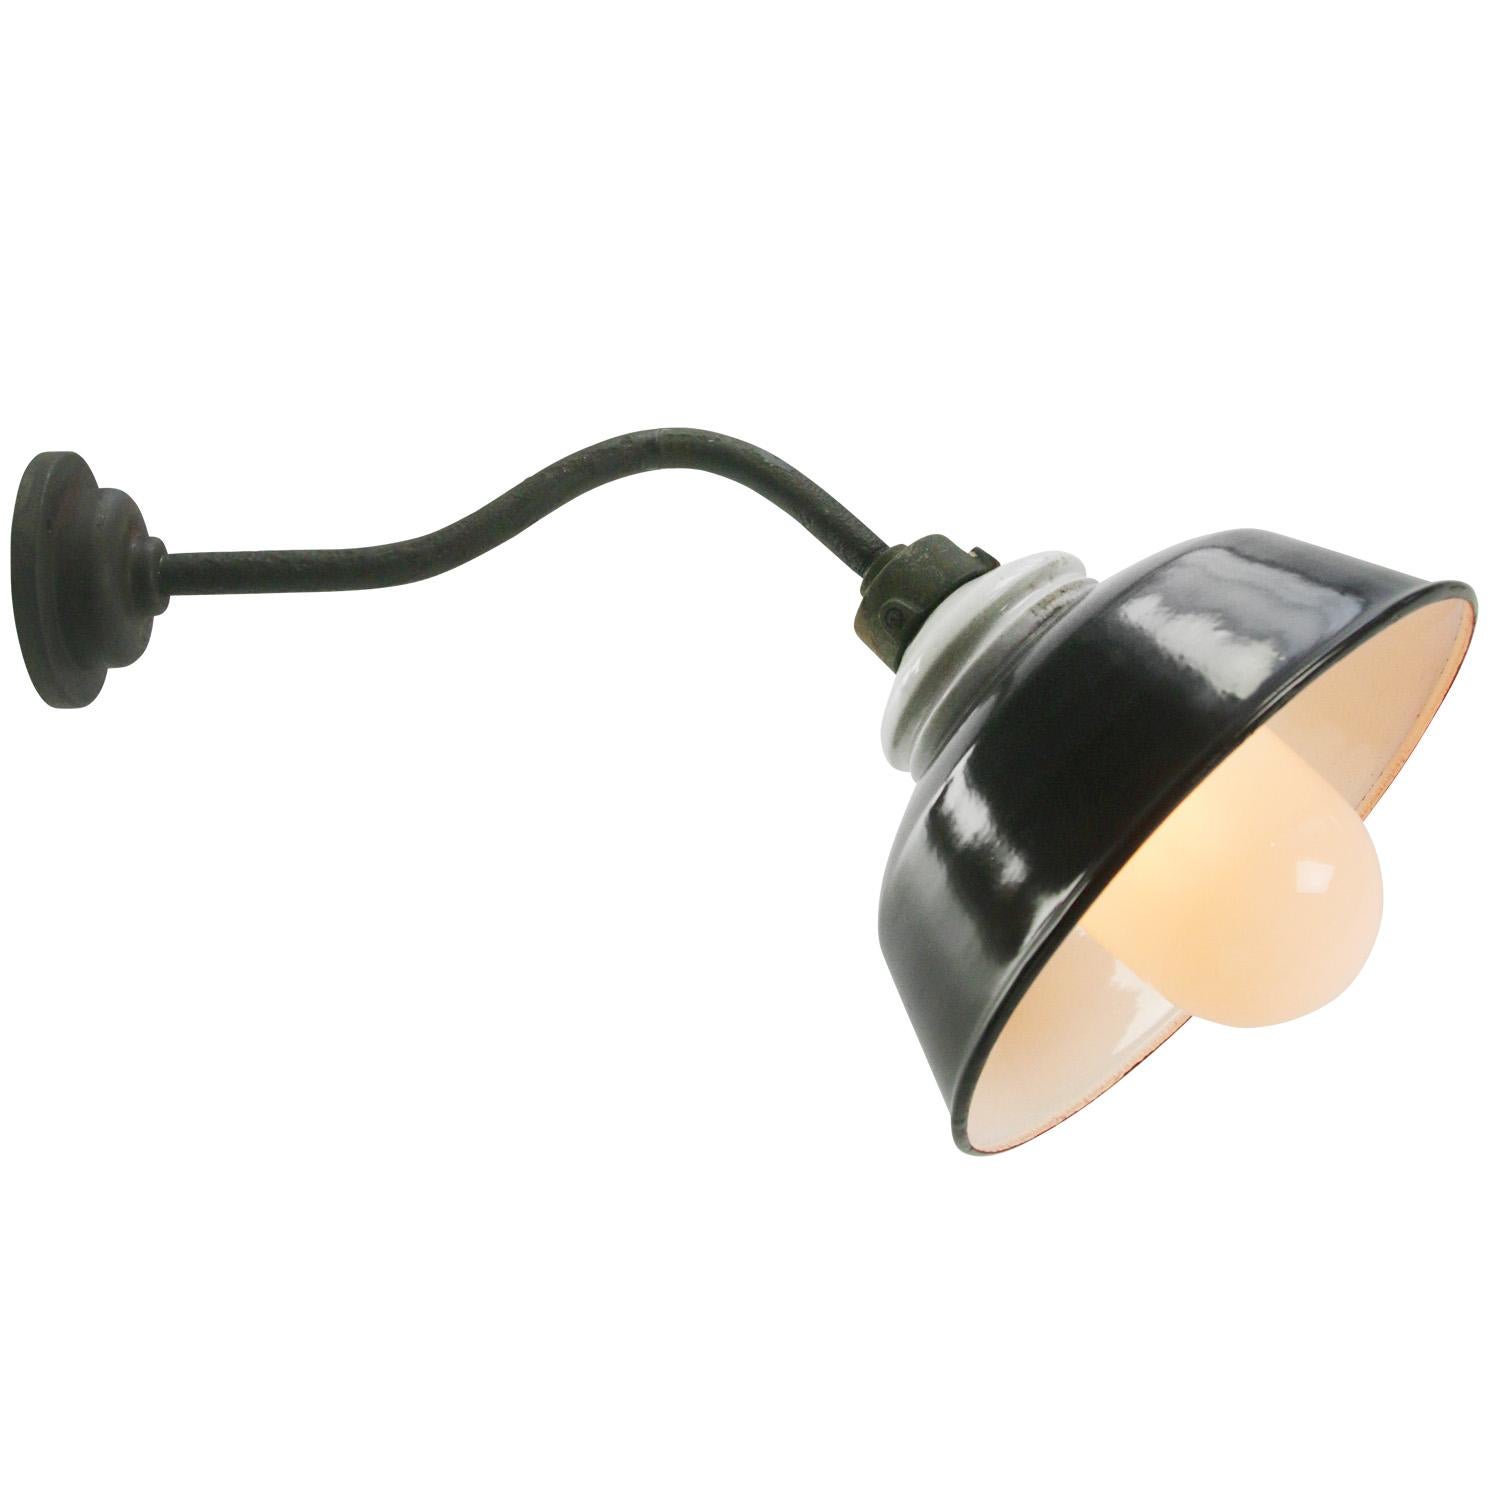 Black enamel industrial wall light with white interior.
cast iron, porcelain top, opaline glass globe.

Diameter cast iron wall mount: 10.5 cm / 4”.
2 holes to secure.

Weight: 2.30 kg / 5.1 lb

Priced per individual item. All lamps have been made